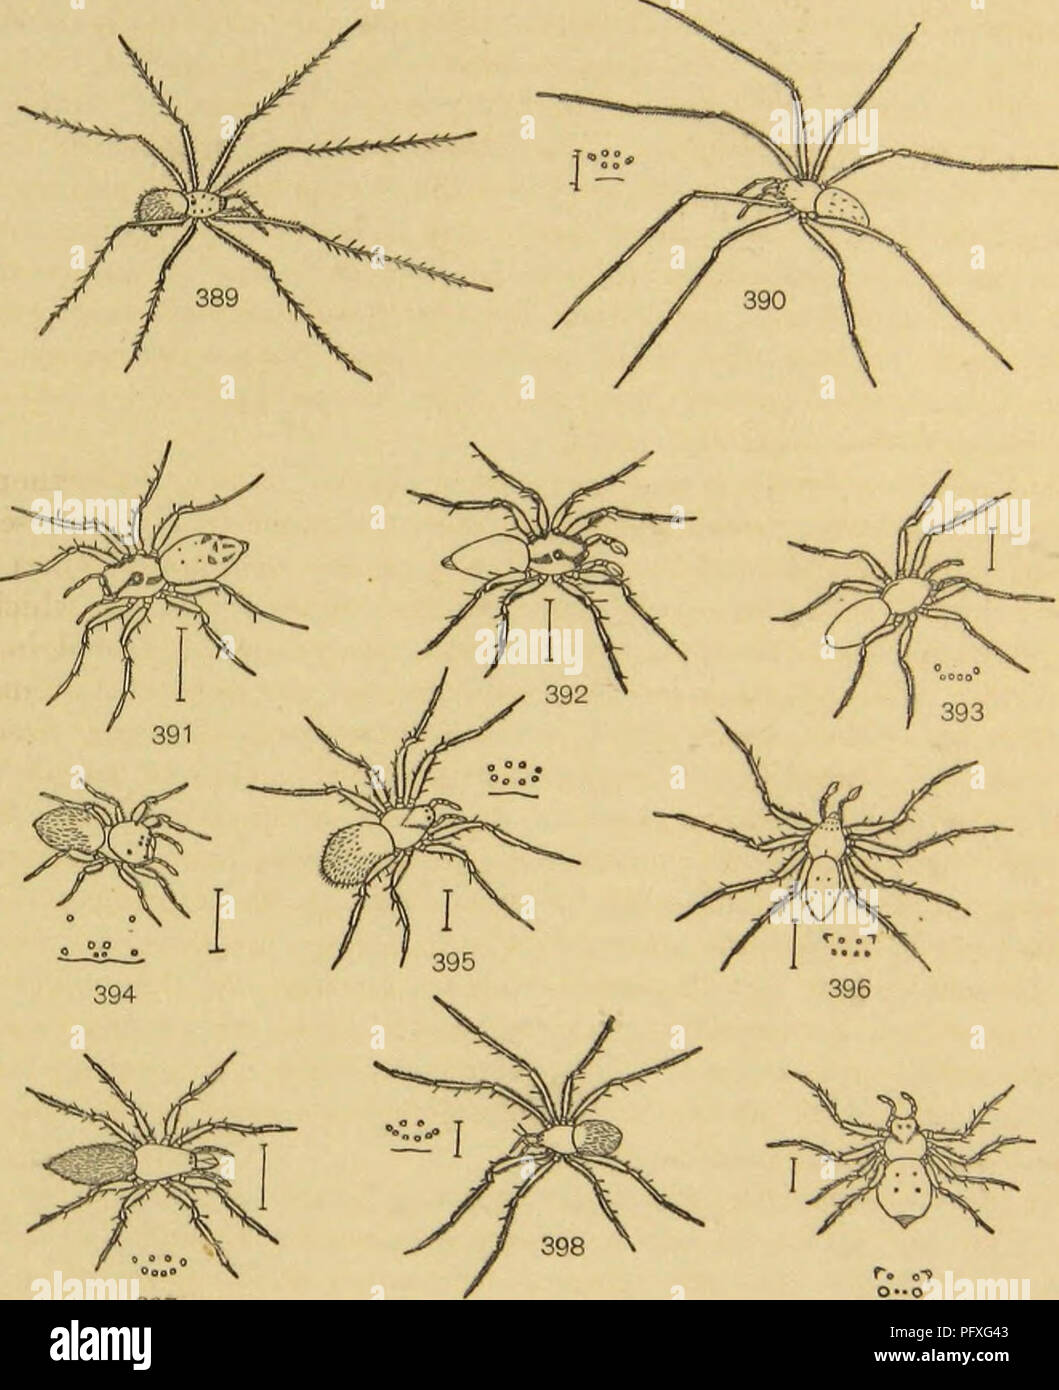 . American spiders and their spinning work. A natural history of the orbweaving spiders of the United States, with special regard to their industry and habits. Spiders. ANCESTRAL SPIDERS AND THEIR HARITS. 467. Fossil spiders of the amber. (After Bereiidt.) Fig. 389. Zilla porrecta, female. Fio. 390. ZiUa gracilis, female. Fic. 391. Pliidippus frc- natus, female. Fig. 392. Pliidippus frenatus, male. Fig. 393. Segestria nana, female. Fig. 394. Eresus monachus, female. Fig. 395. Ero setulosa, female. Fig. 396. Philo- dromus microeephalus, male. Fifi. 397. Clubiona attenuata, female. Fig. 398. The Stock Photo